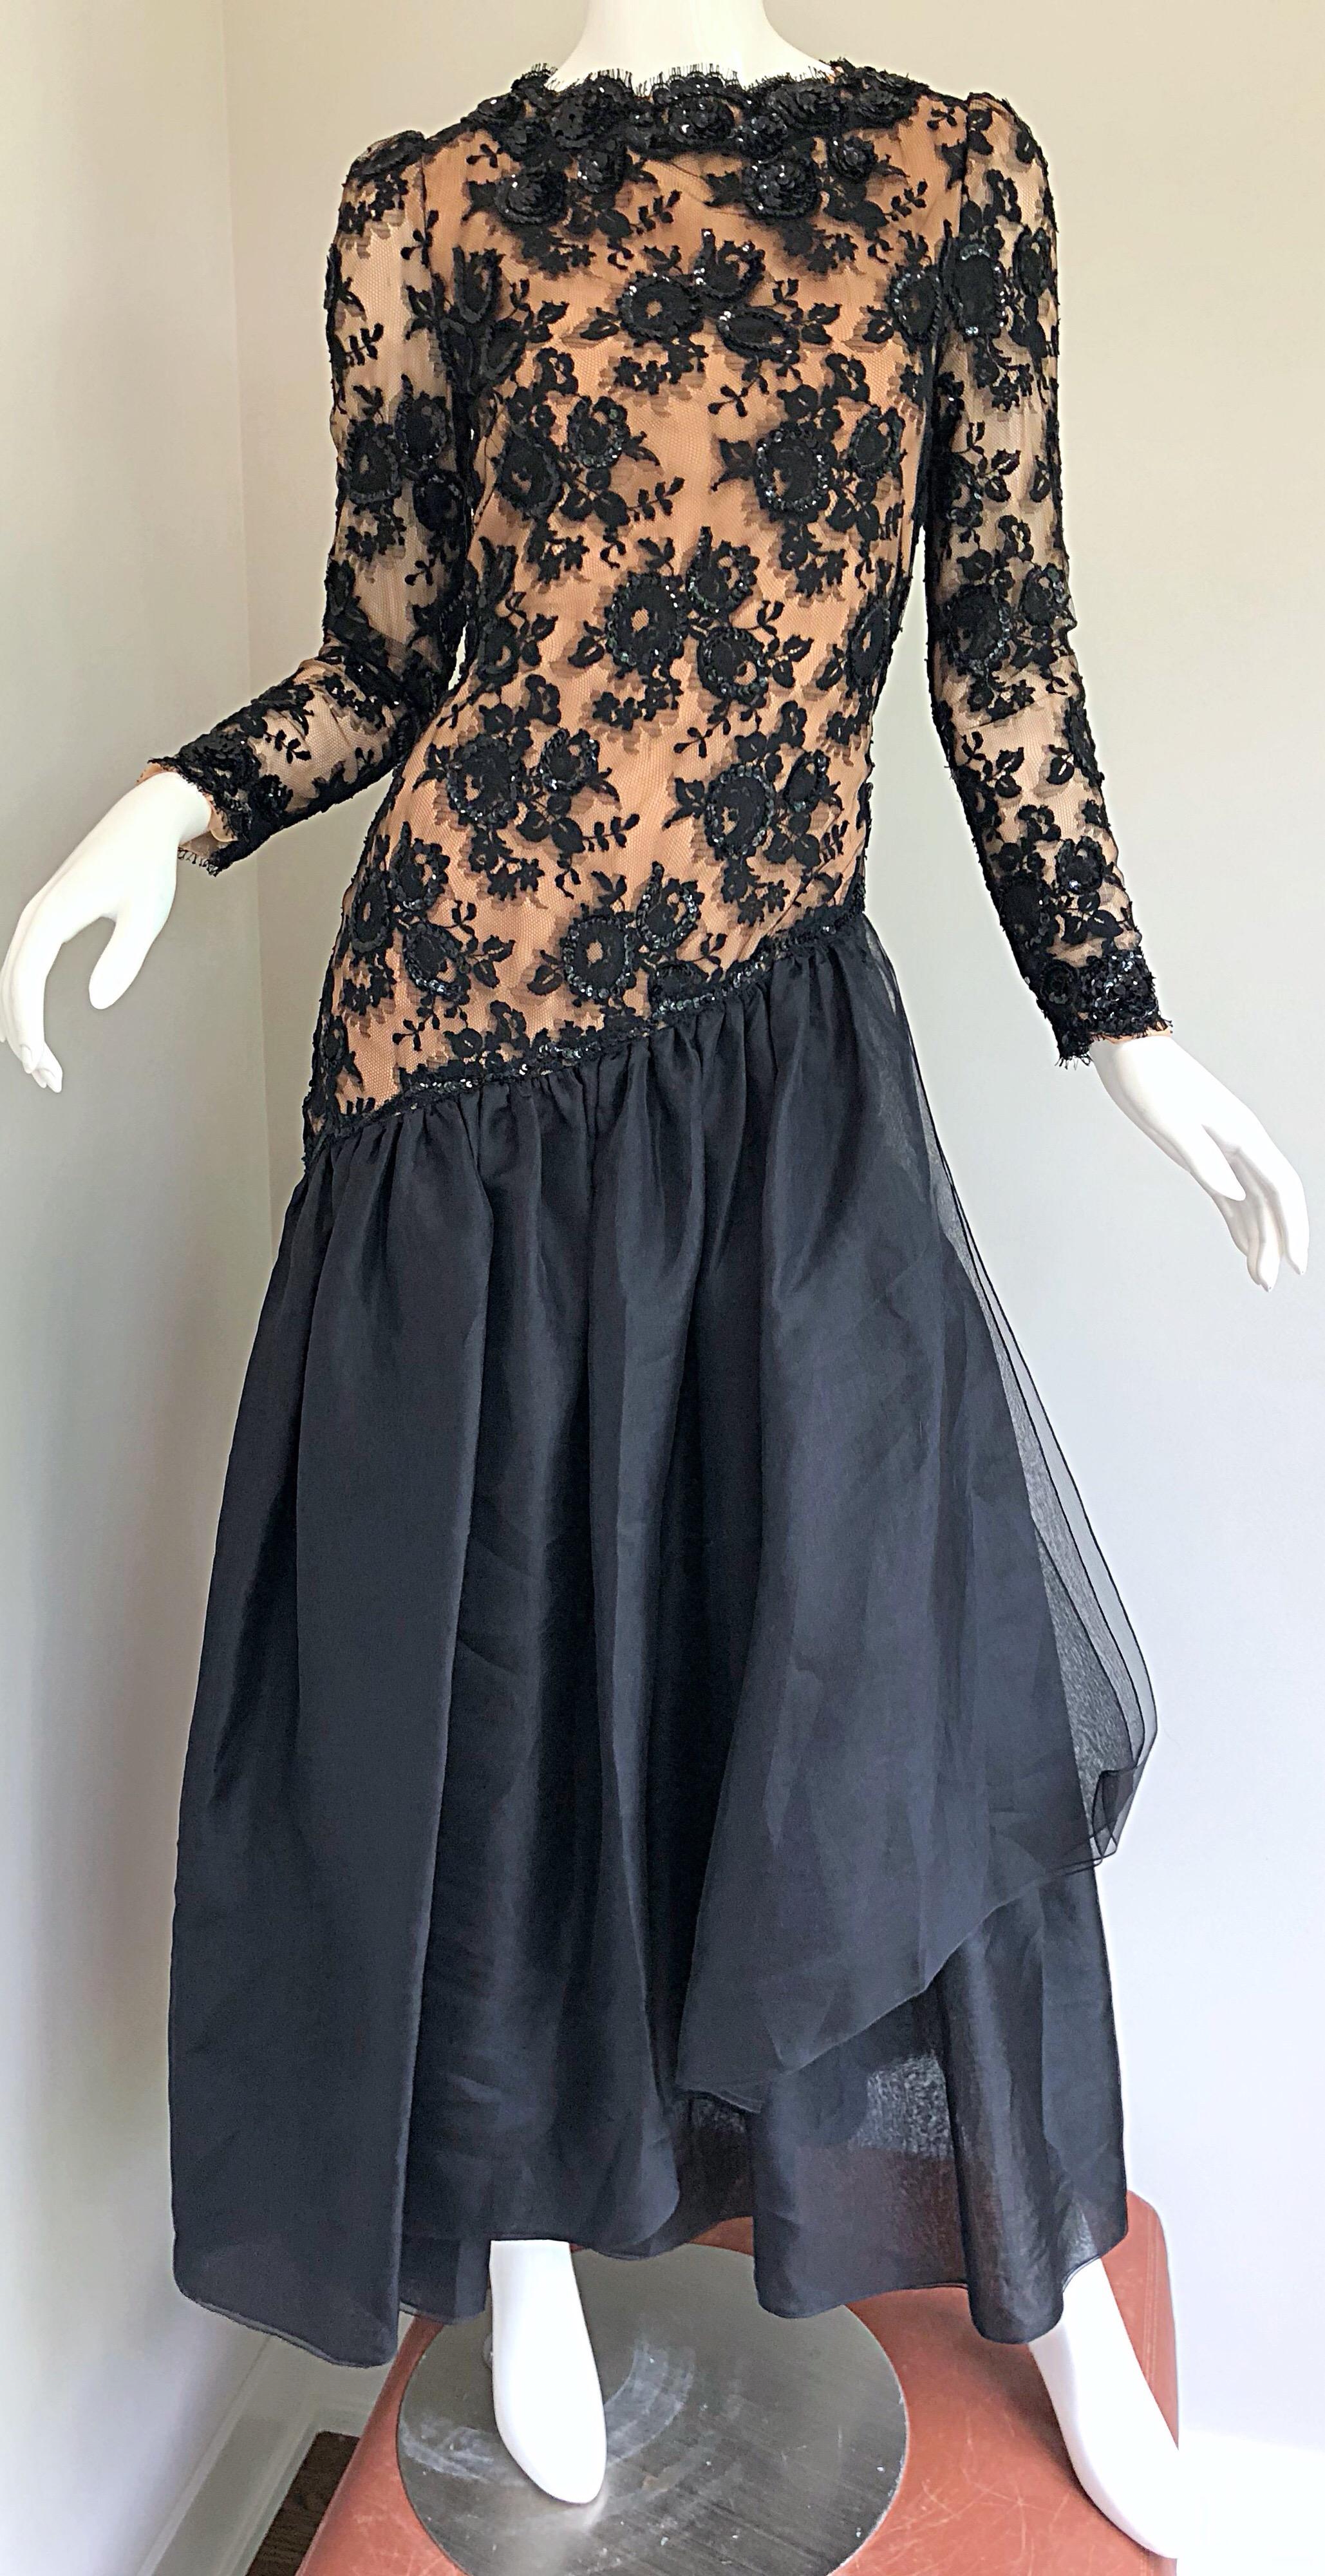 Vintage Bill Blass Black Nude 90s Size 6 / 8 Sequined Chiffon Evening Gown Dress For Sale 2